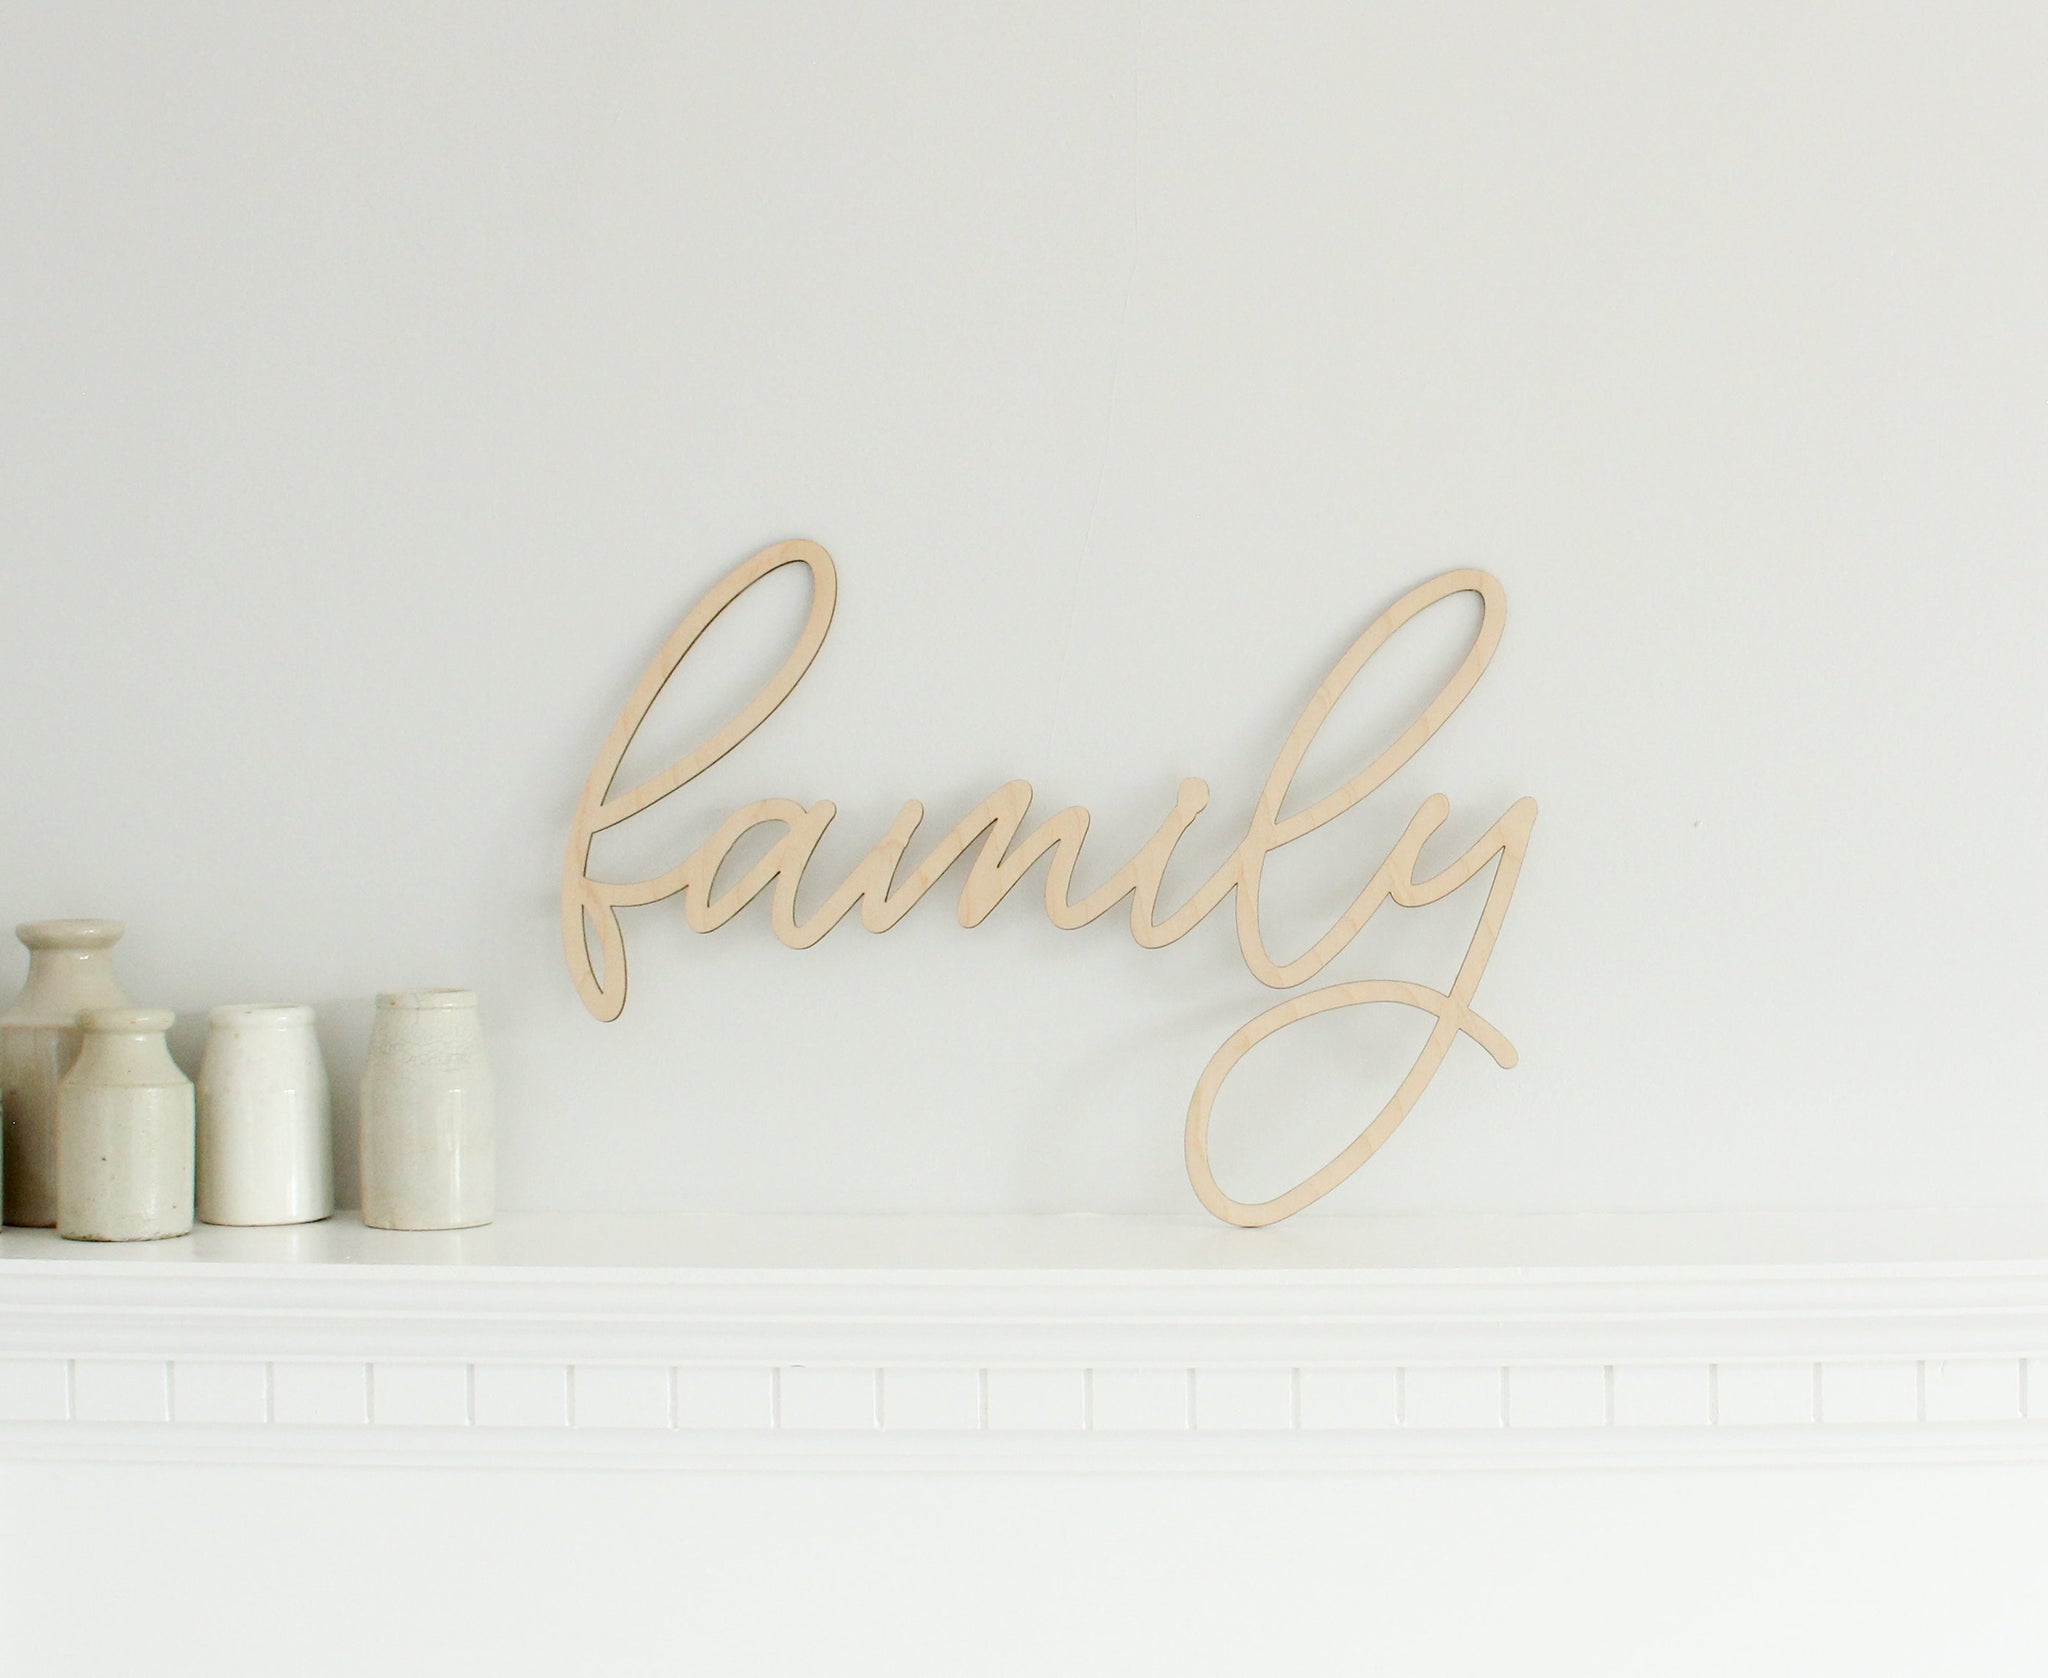 Wooden Family Sign, Family Wall Sign Wooden Wall Art Rustic Home Decor Dining Room Decor Wood Sign Housewarming Gift Family Decor Rustic